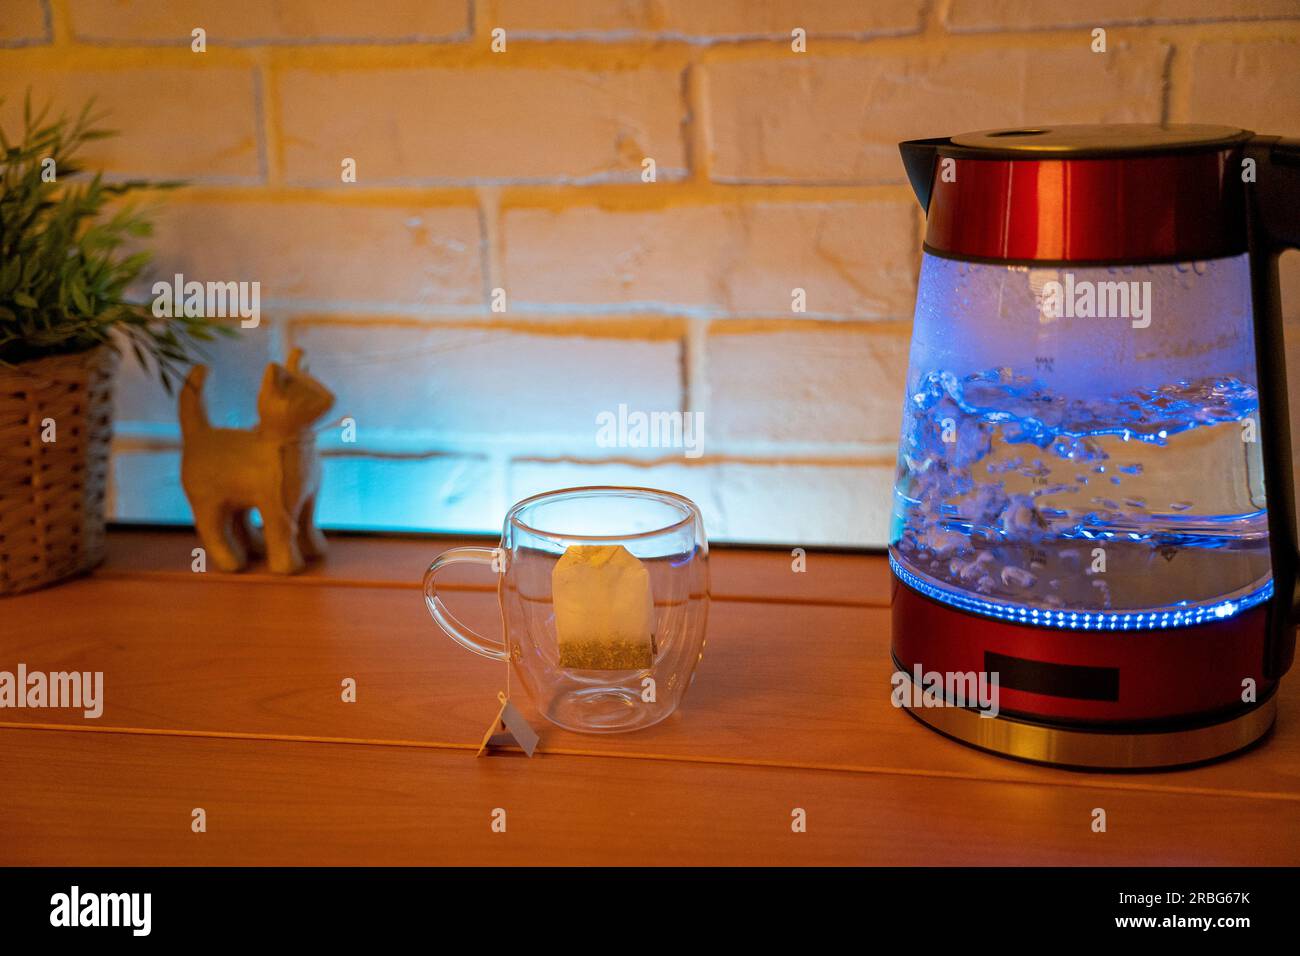 https://c8.alamy.com/comp/2RBG67K/a-glass-electric-kettle-on-a-wooden-table-and-a-transparent-mug-with-a-bag-of-delicious-tea-high-quality-photo-2RBG67K.jpg